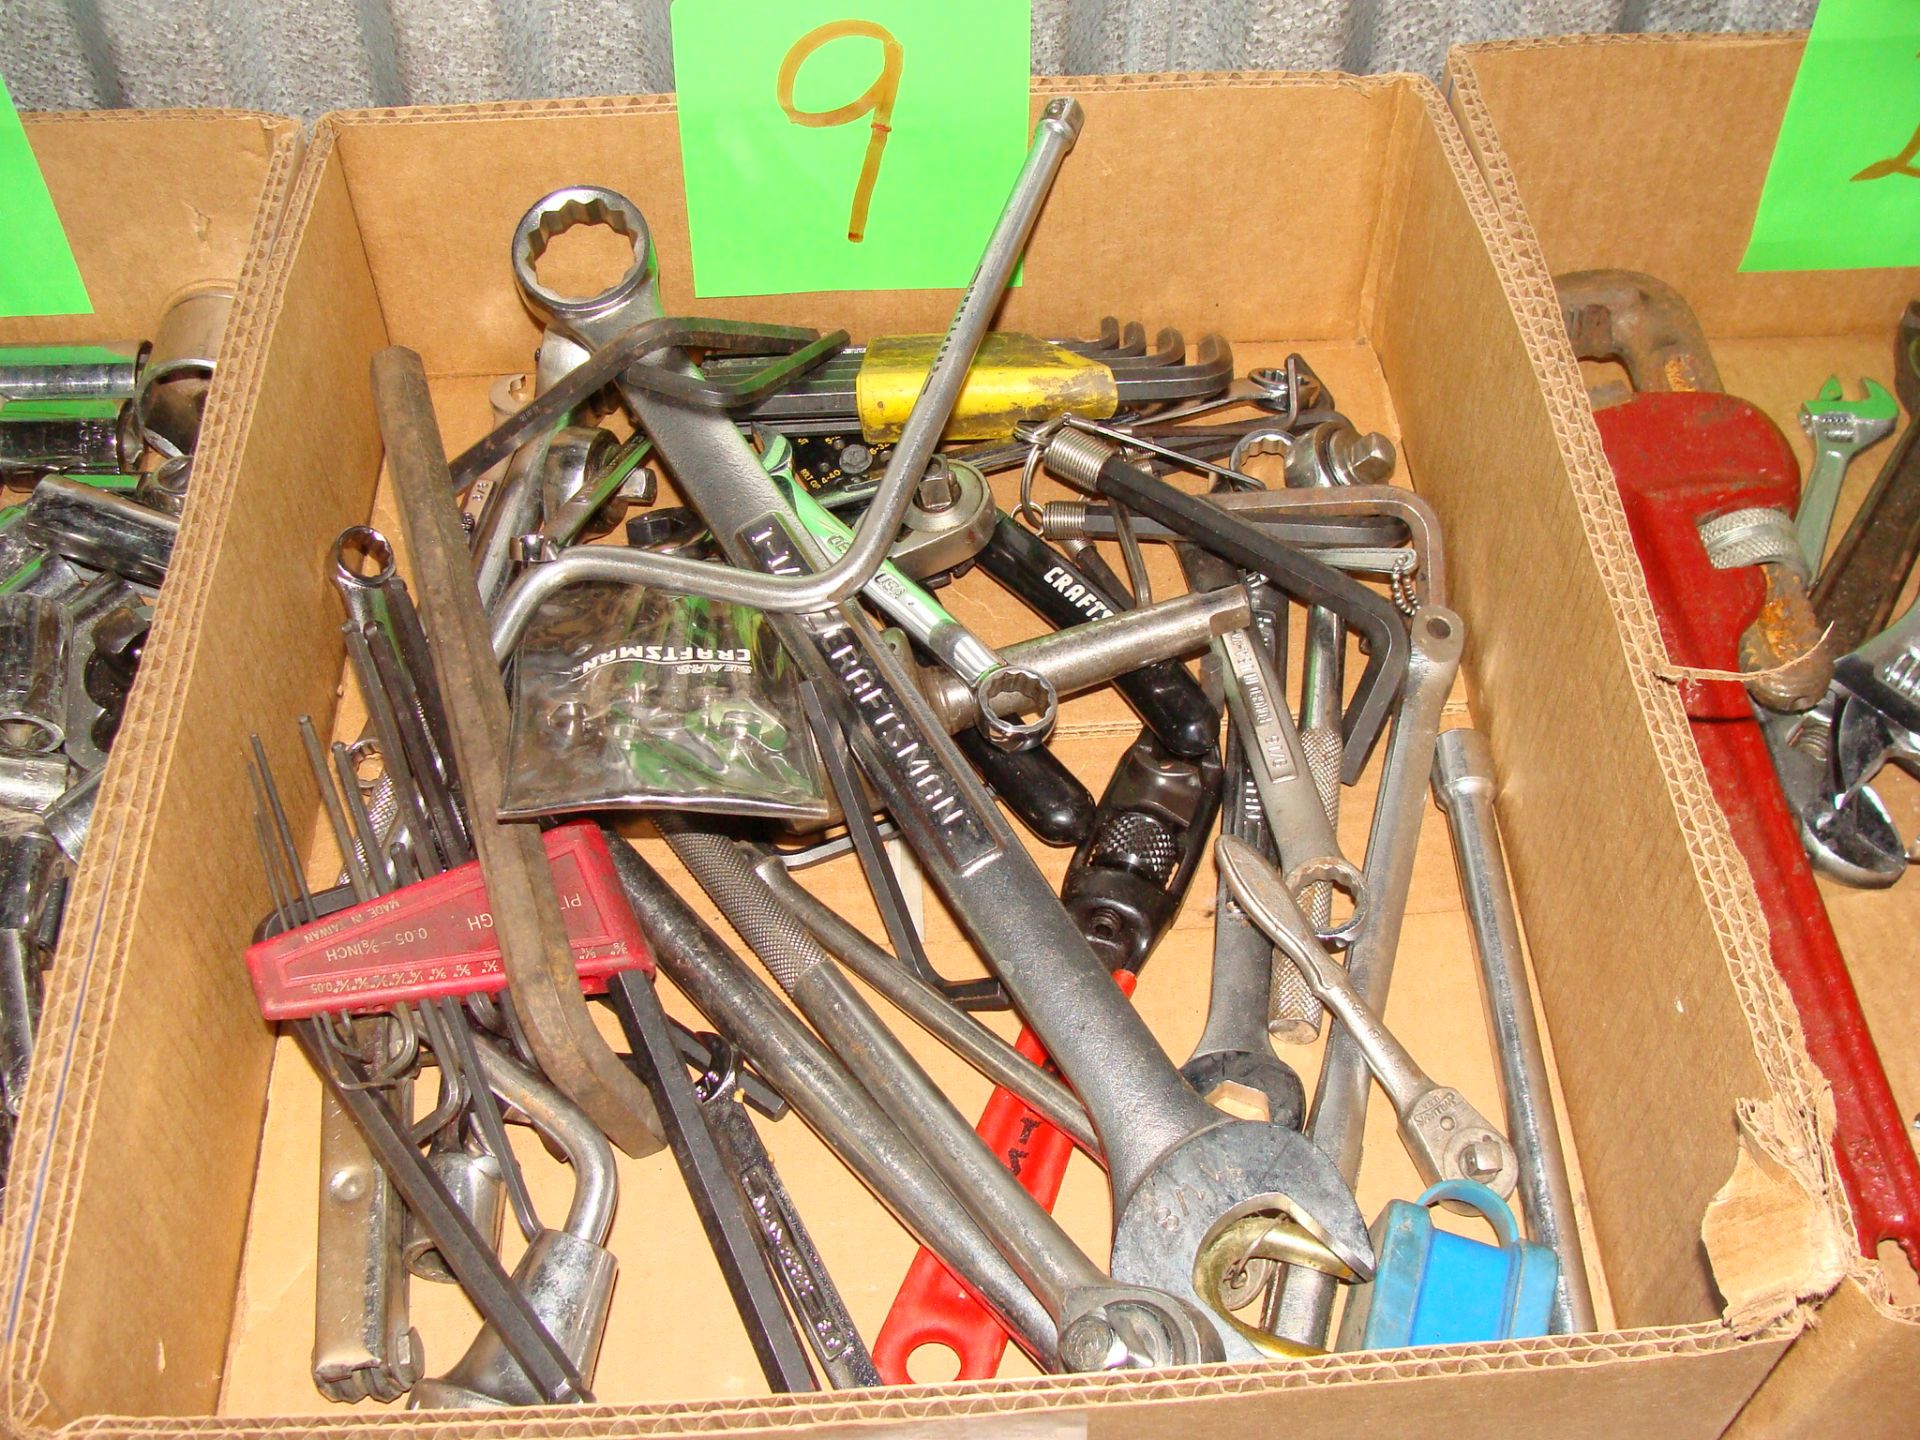 Craftsman Wrenches and Misc